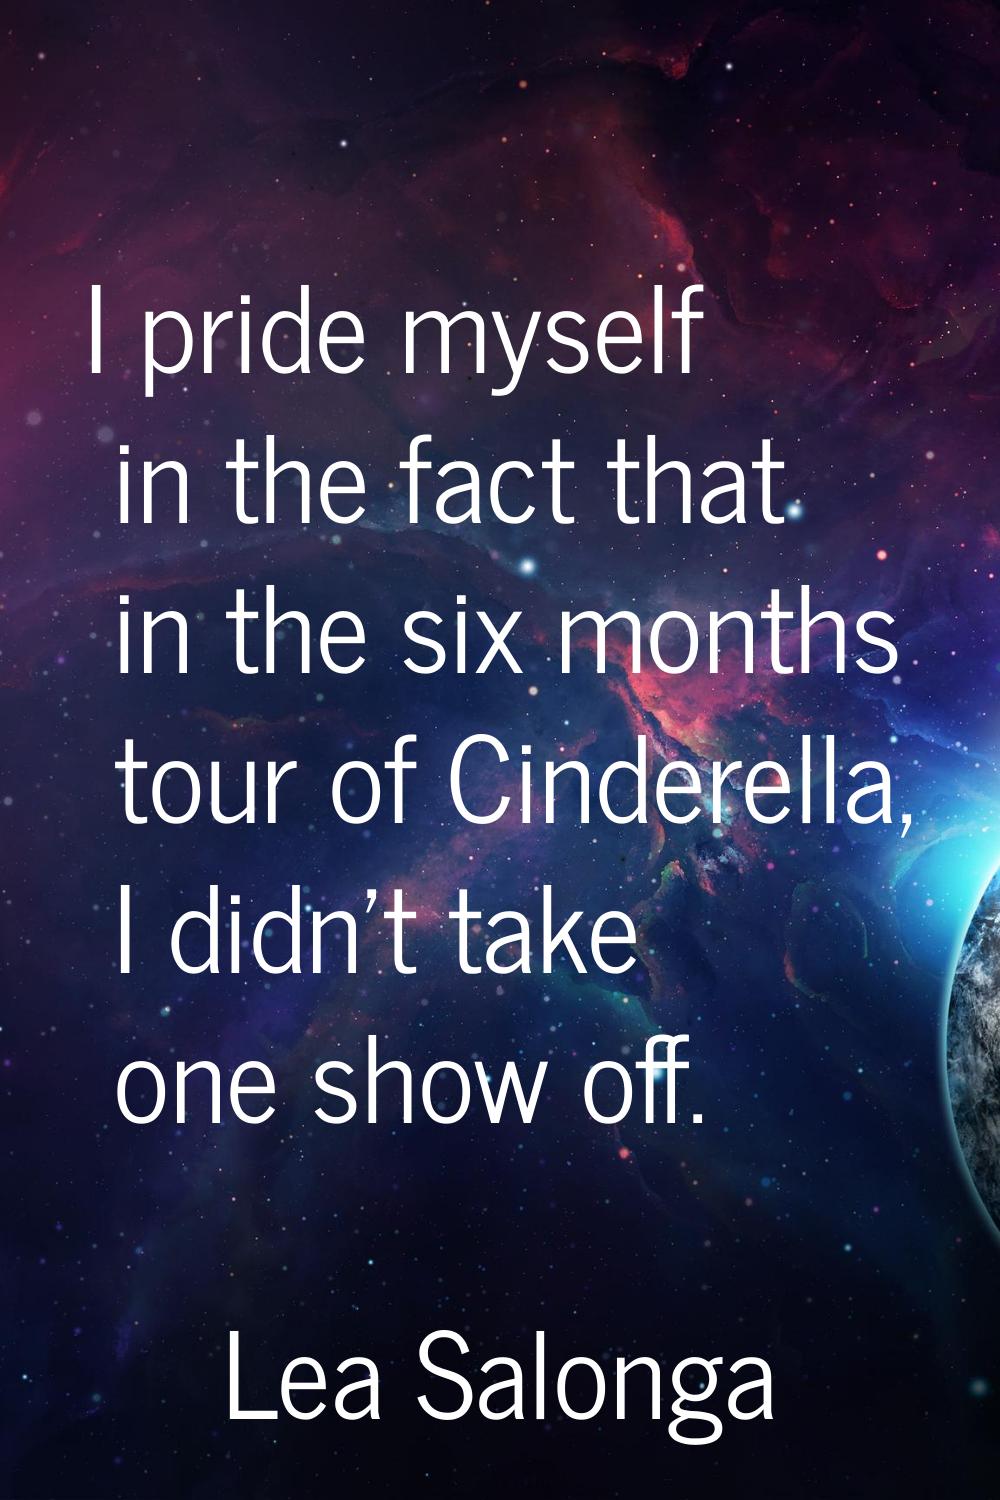 I pride myself in the fact that in the six months tour of Cinderella, I didn't take one show off.